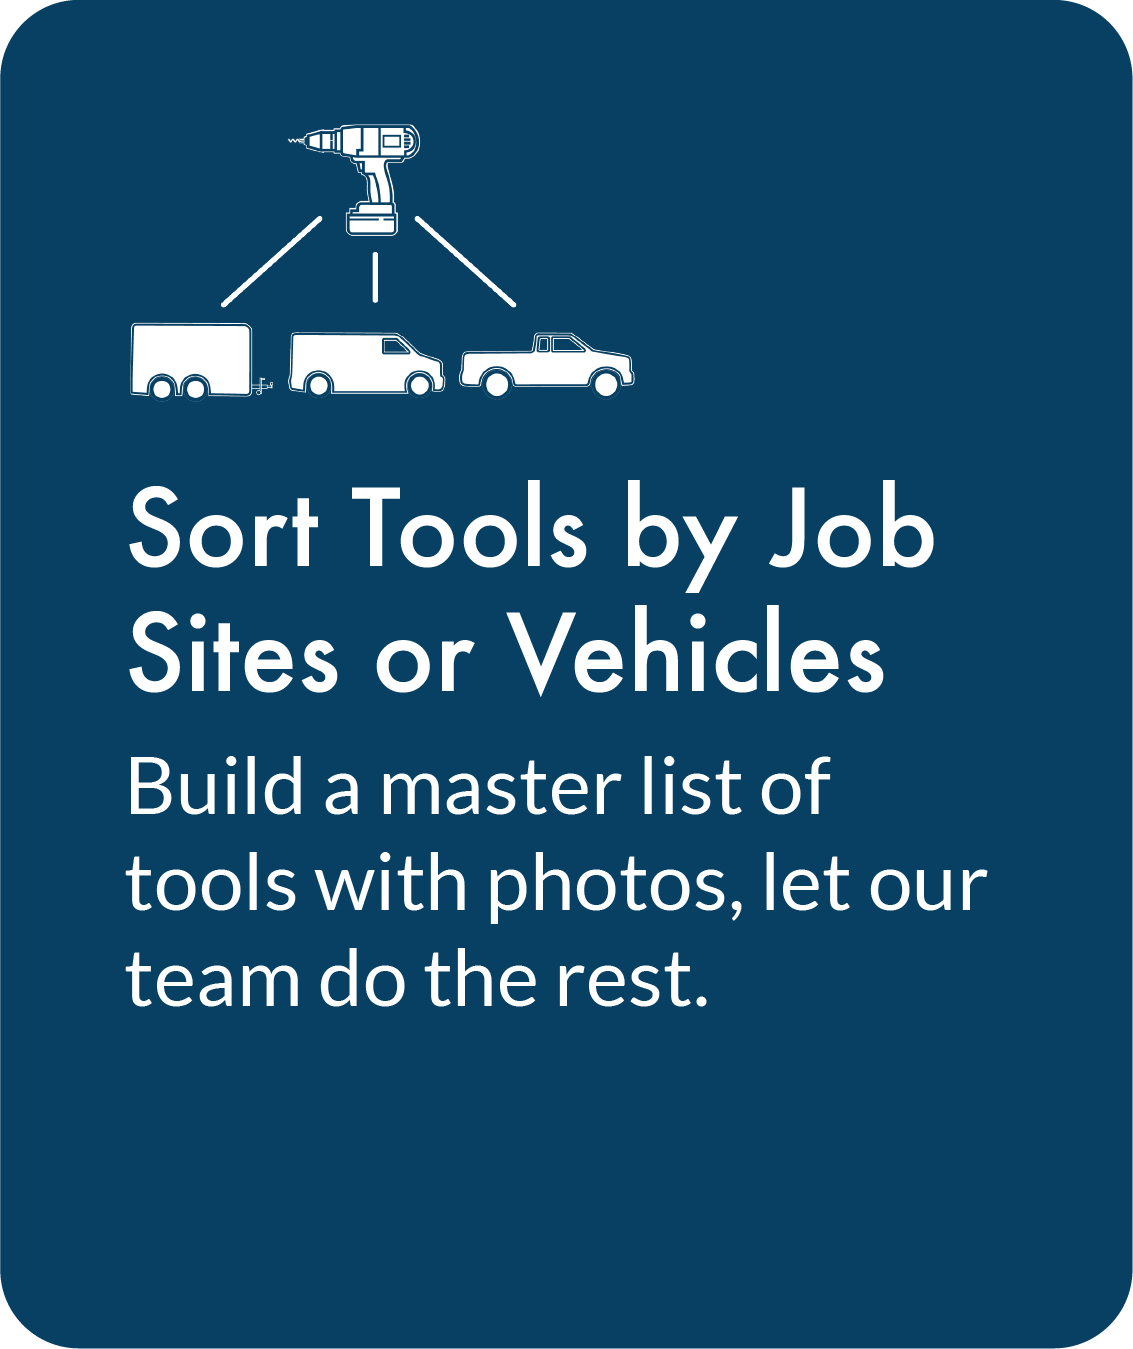 Sort Tools by Job Sites or Vehicles. Build a master list of tools with photos, let our team do the rest.